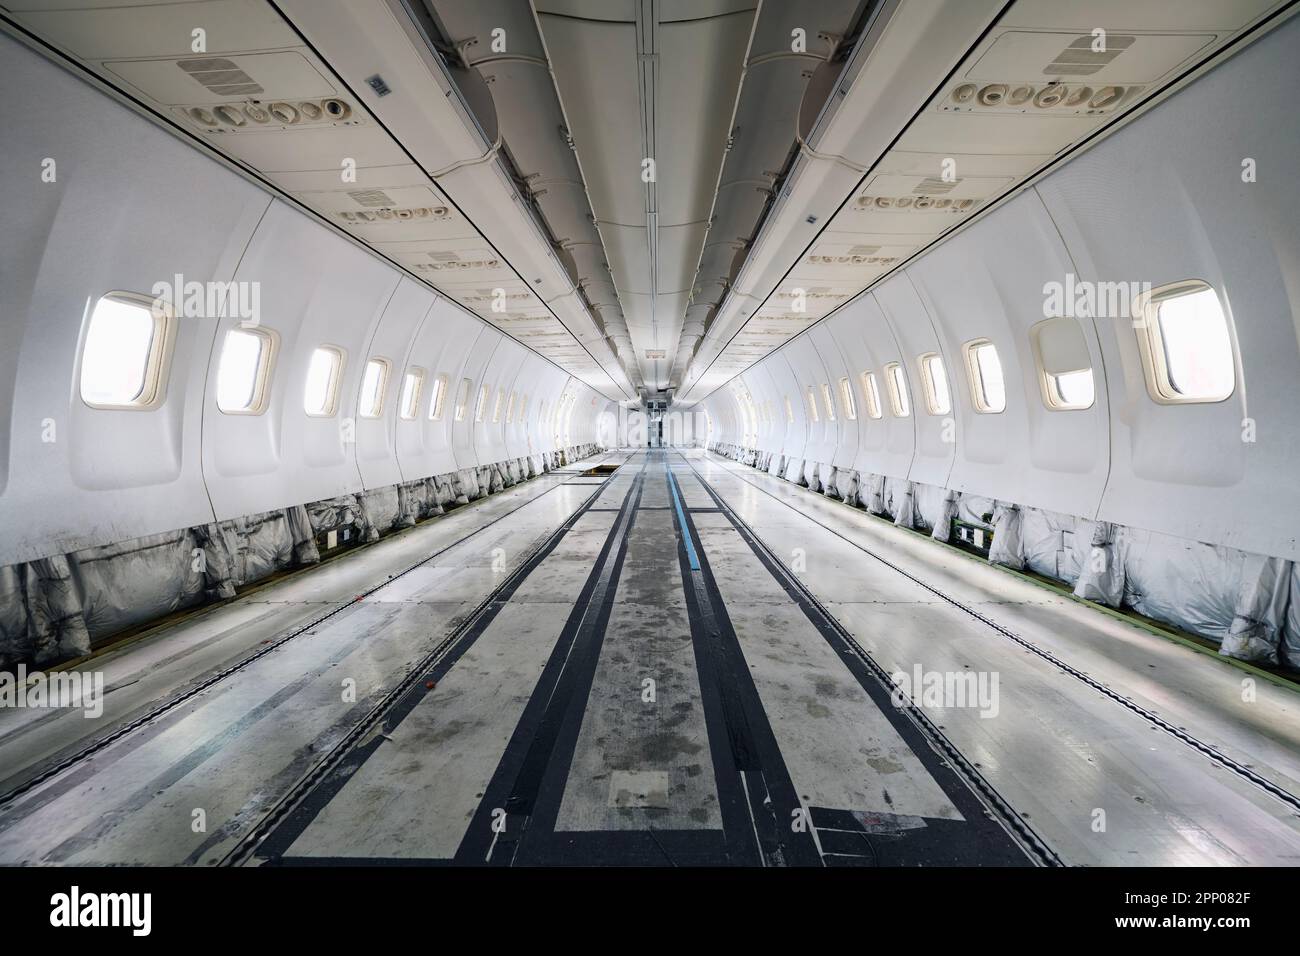 Commercial airplane under heavy maintenance. Inside of passenger cabit without seats and interior. Stock Photo